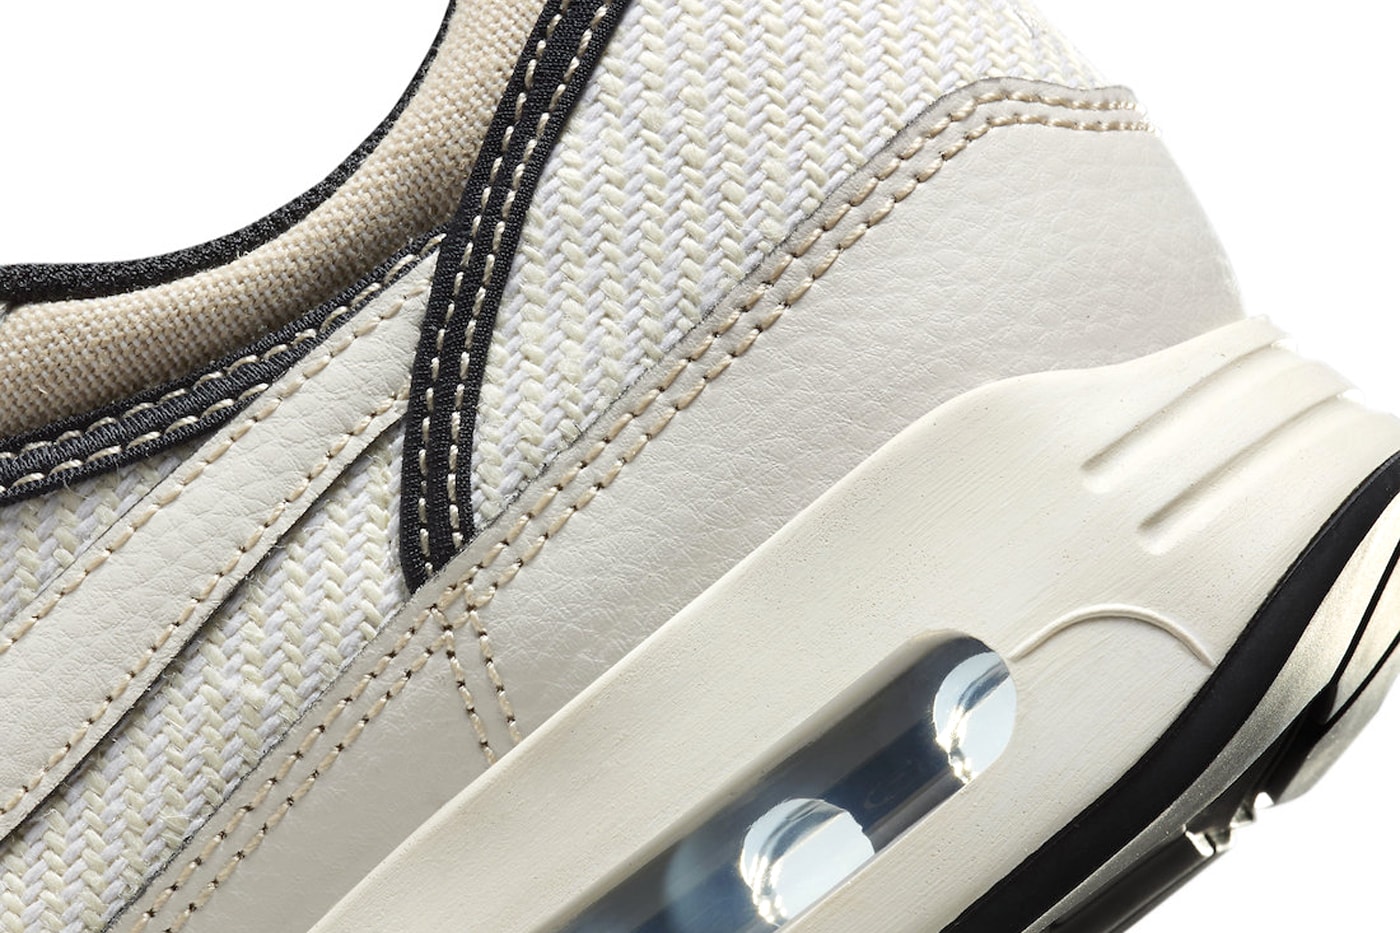 First Look at the Nike Air Max 1 '86 World Make nike korea mesh swoosh leather wardrobe staple white summer shoes